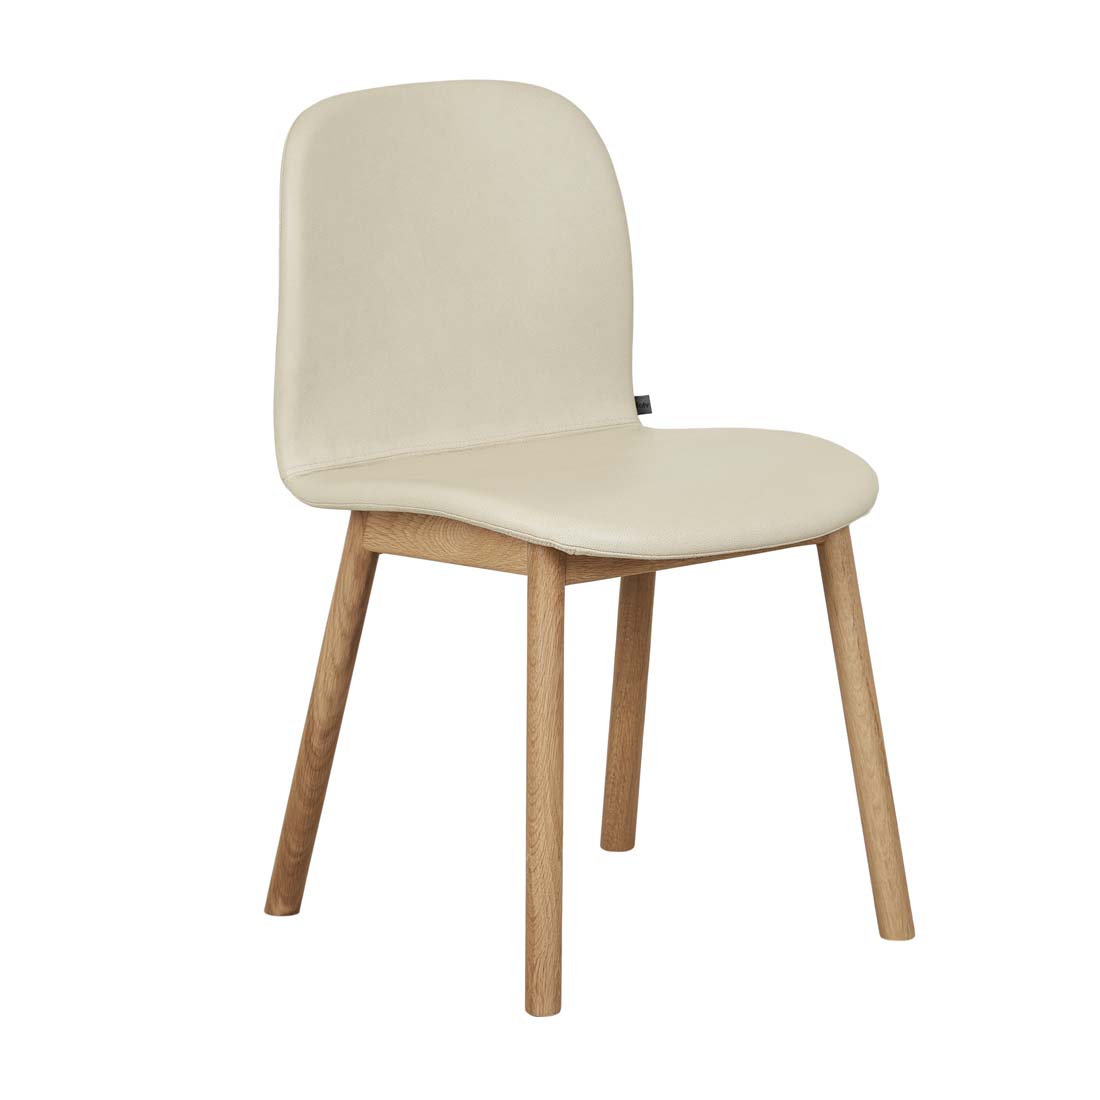 Tolv Com Dining Chair image 31